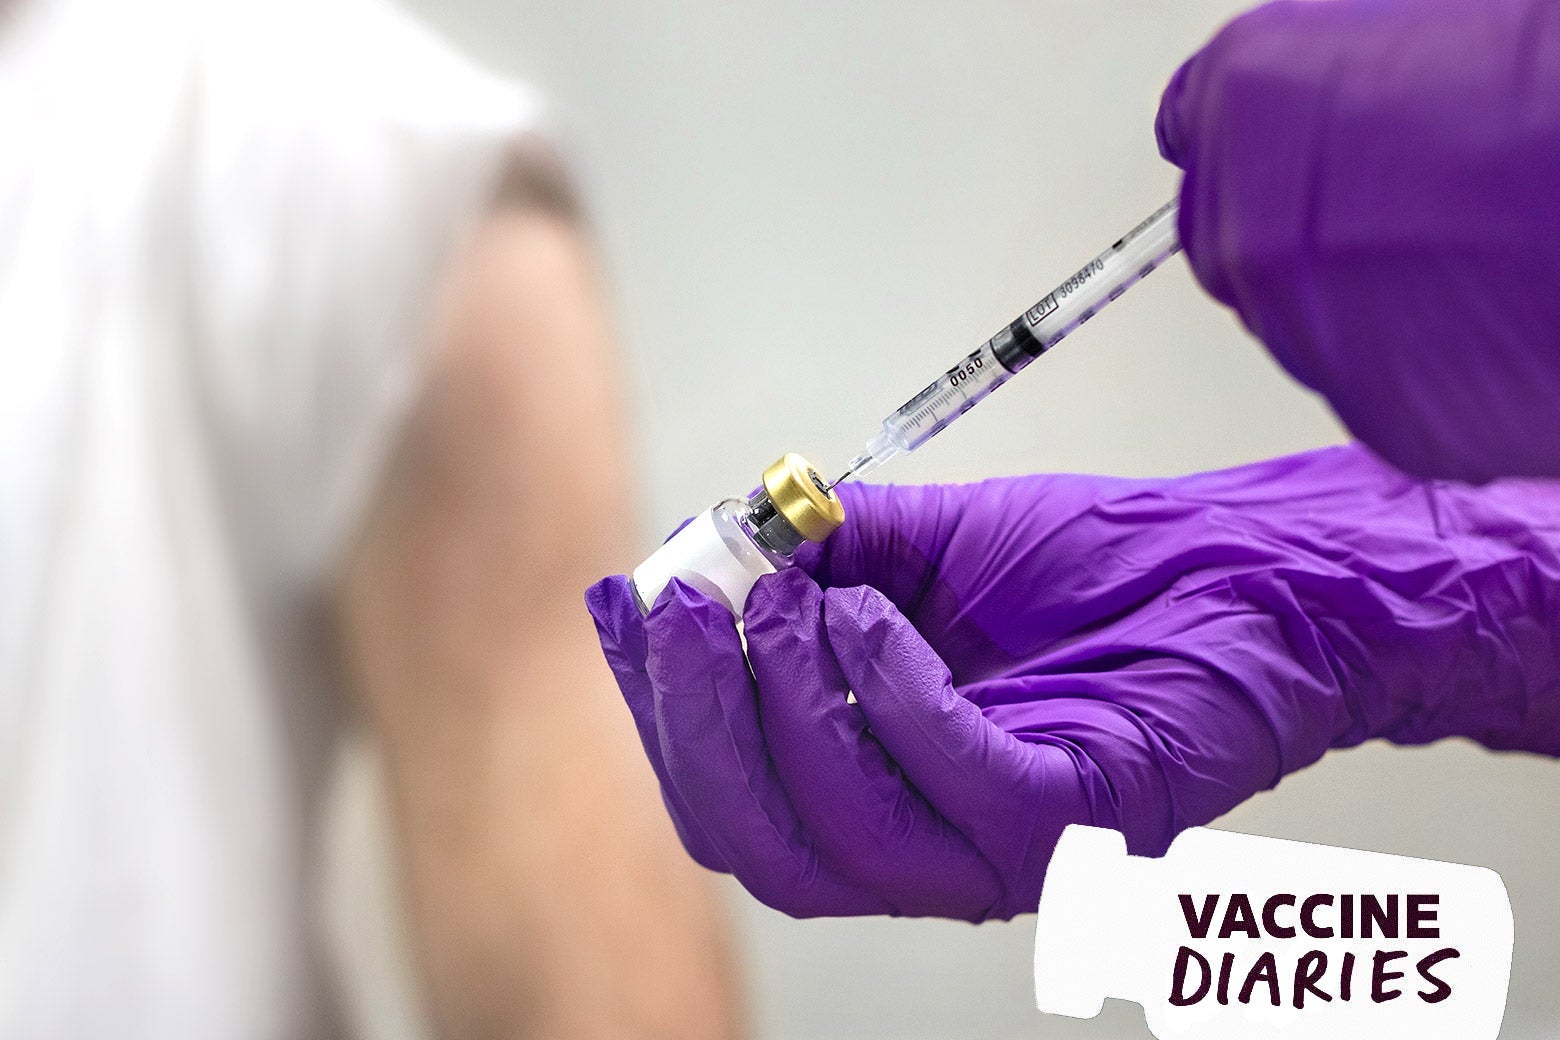 In the foreground, a purple-gloved hand drawing vaccine out of a vial. In the background, a person with their sleeve rolled up to expose their arm.